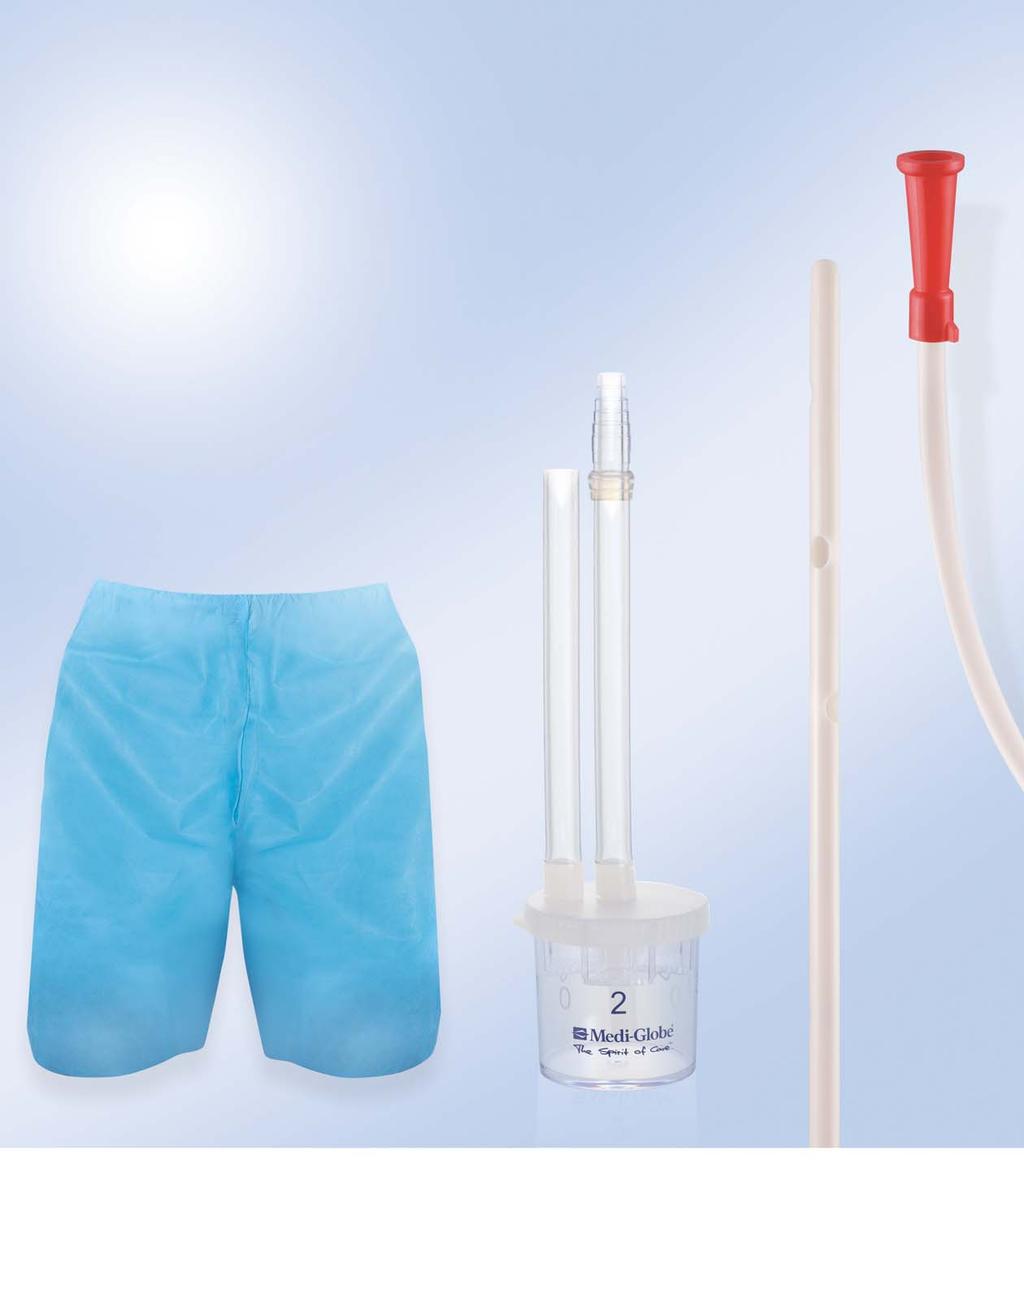 Colonoscopy Accessories Single Use Polyp Trap Four Independent, Selectable Chambers with Visible Markers Accurate Classifi cation of Polyps & Specimens Highly Flexible Tubes Easy to Connect to